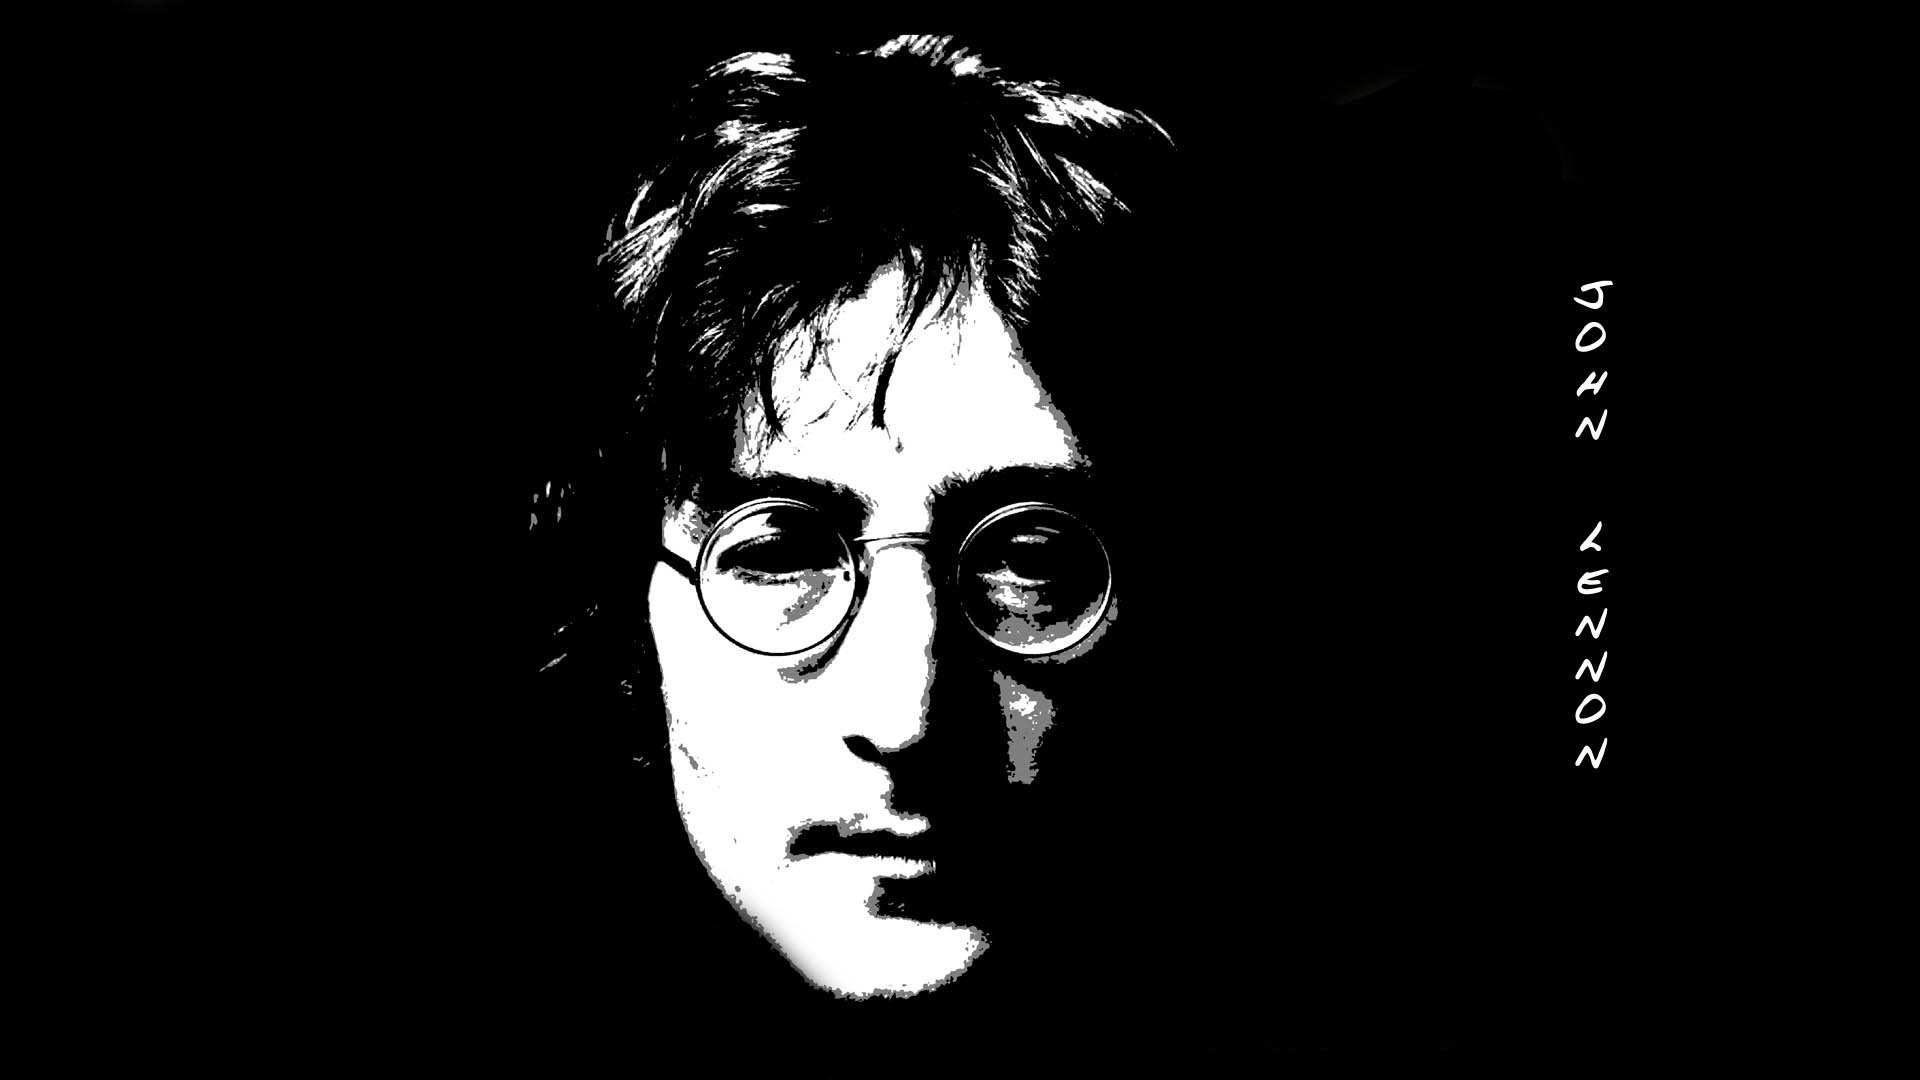 Download free HD wallpaper from above link music JohnLennonWallpaper  JohnLennonWallpaperIphone JohnLennon  John lennon Imagine john lennon John  lennon wall